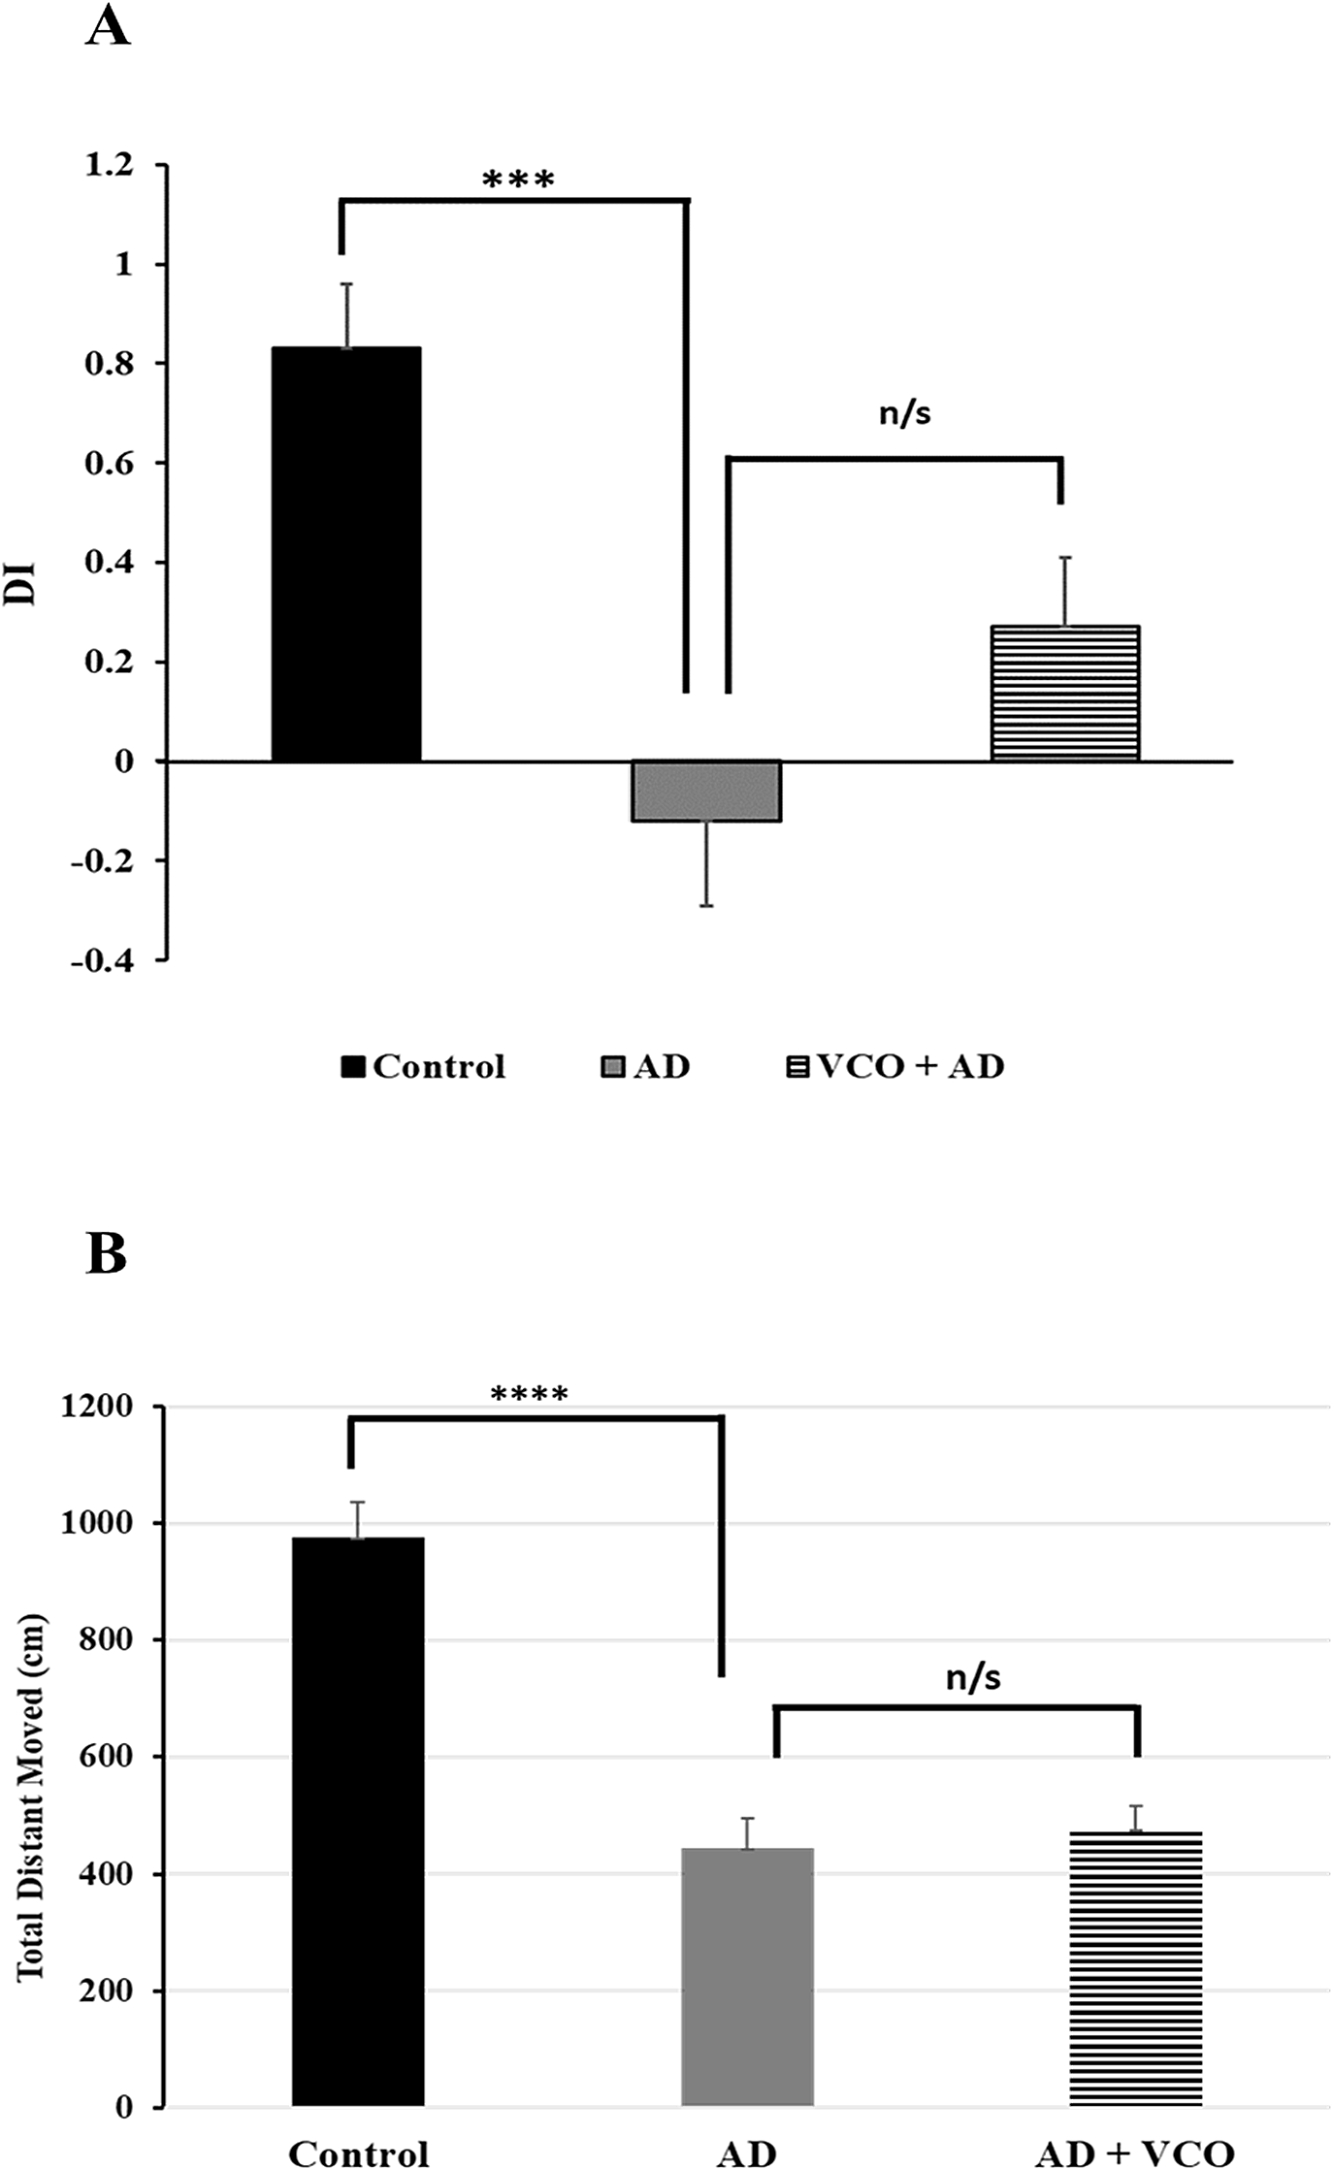 (A) Discrimination index between novel and familiar objects in the different groups: A significant reduction in the DI was apparent in the AD group vs. contro), but improvement of DI in the AD+VCO group didn’t reach a significant level (n/s) vs. the AD group). (B) Evaluation of the rats’ motor activity by measuring the total distance moved by centimetre: A significant reduction in the total distance moved was apparent in the AD group vs. the control group but no improvement in motor activity (n/s) in the AD+VCO group vs. the AD.